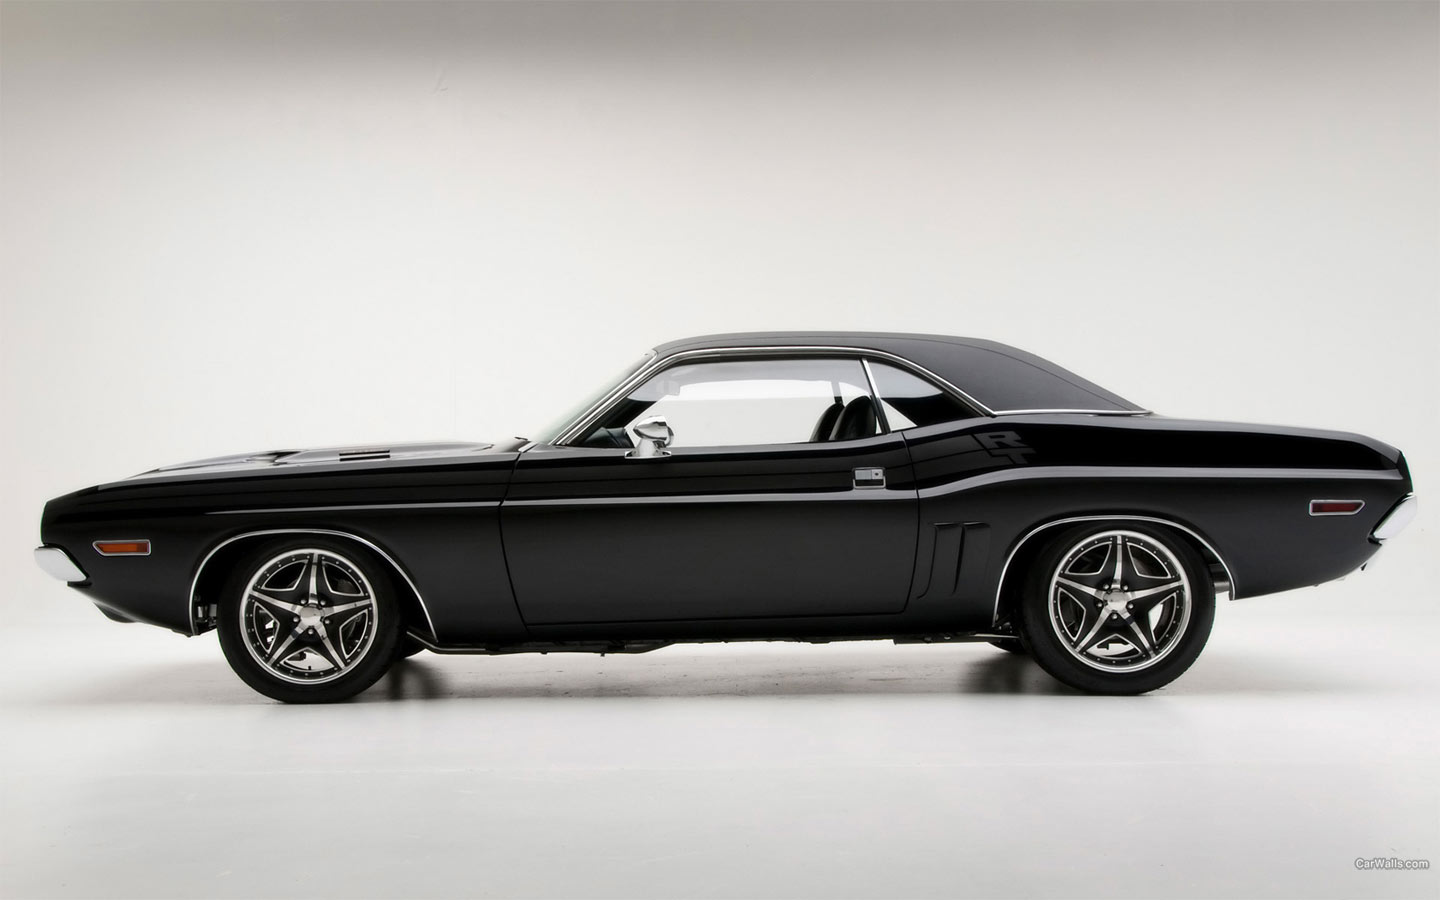 1971 Dodge challenger RT Muscle Car